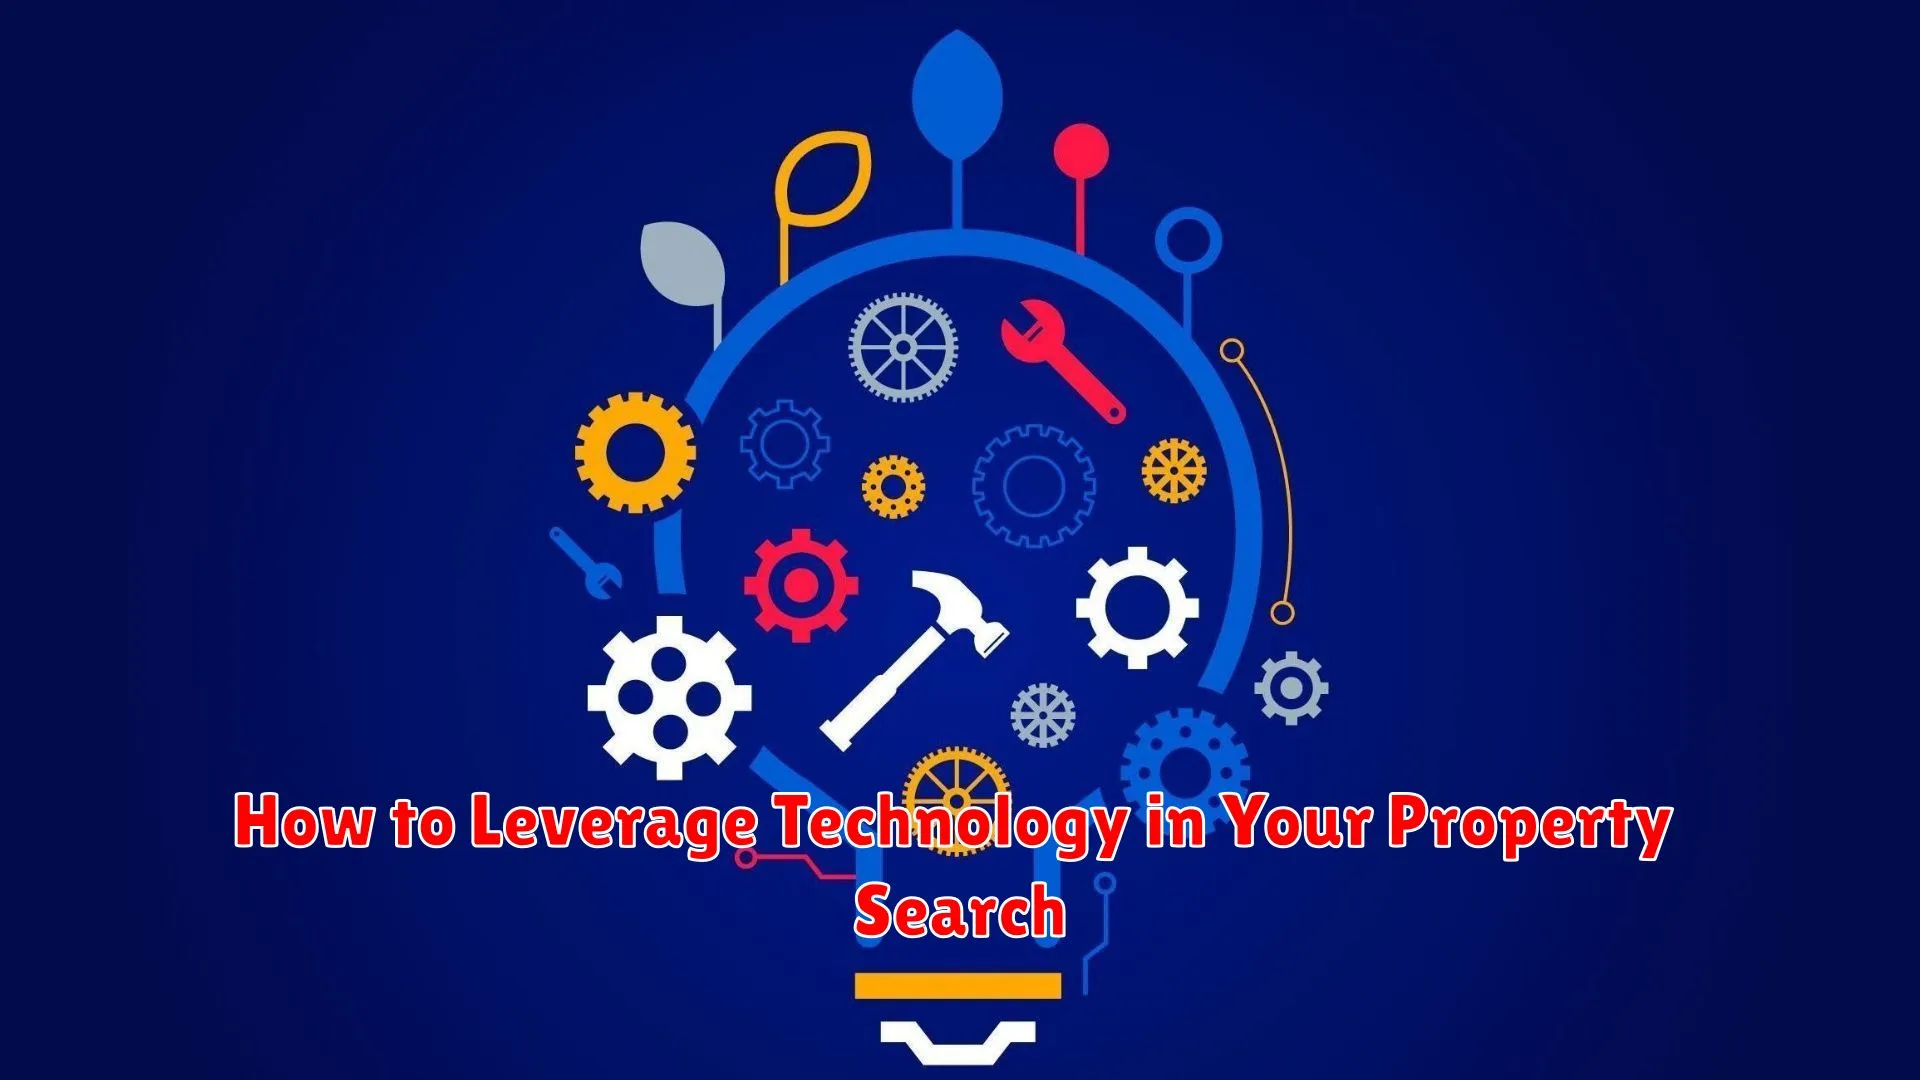 How to Leverage Technology in Your Property Search